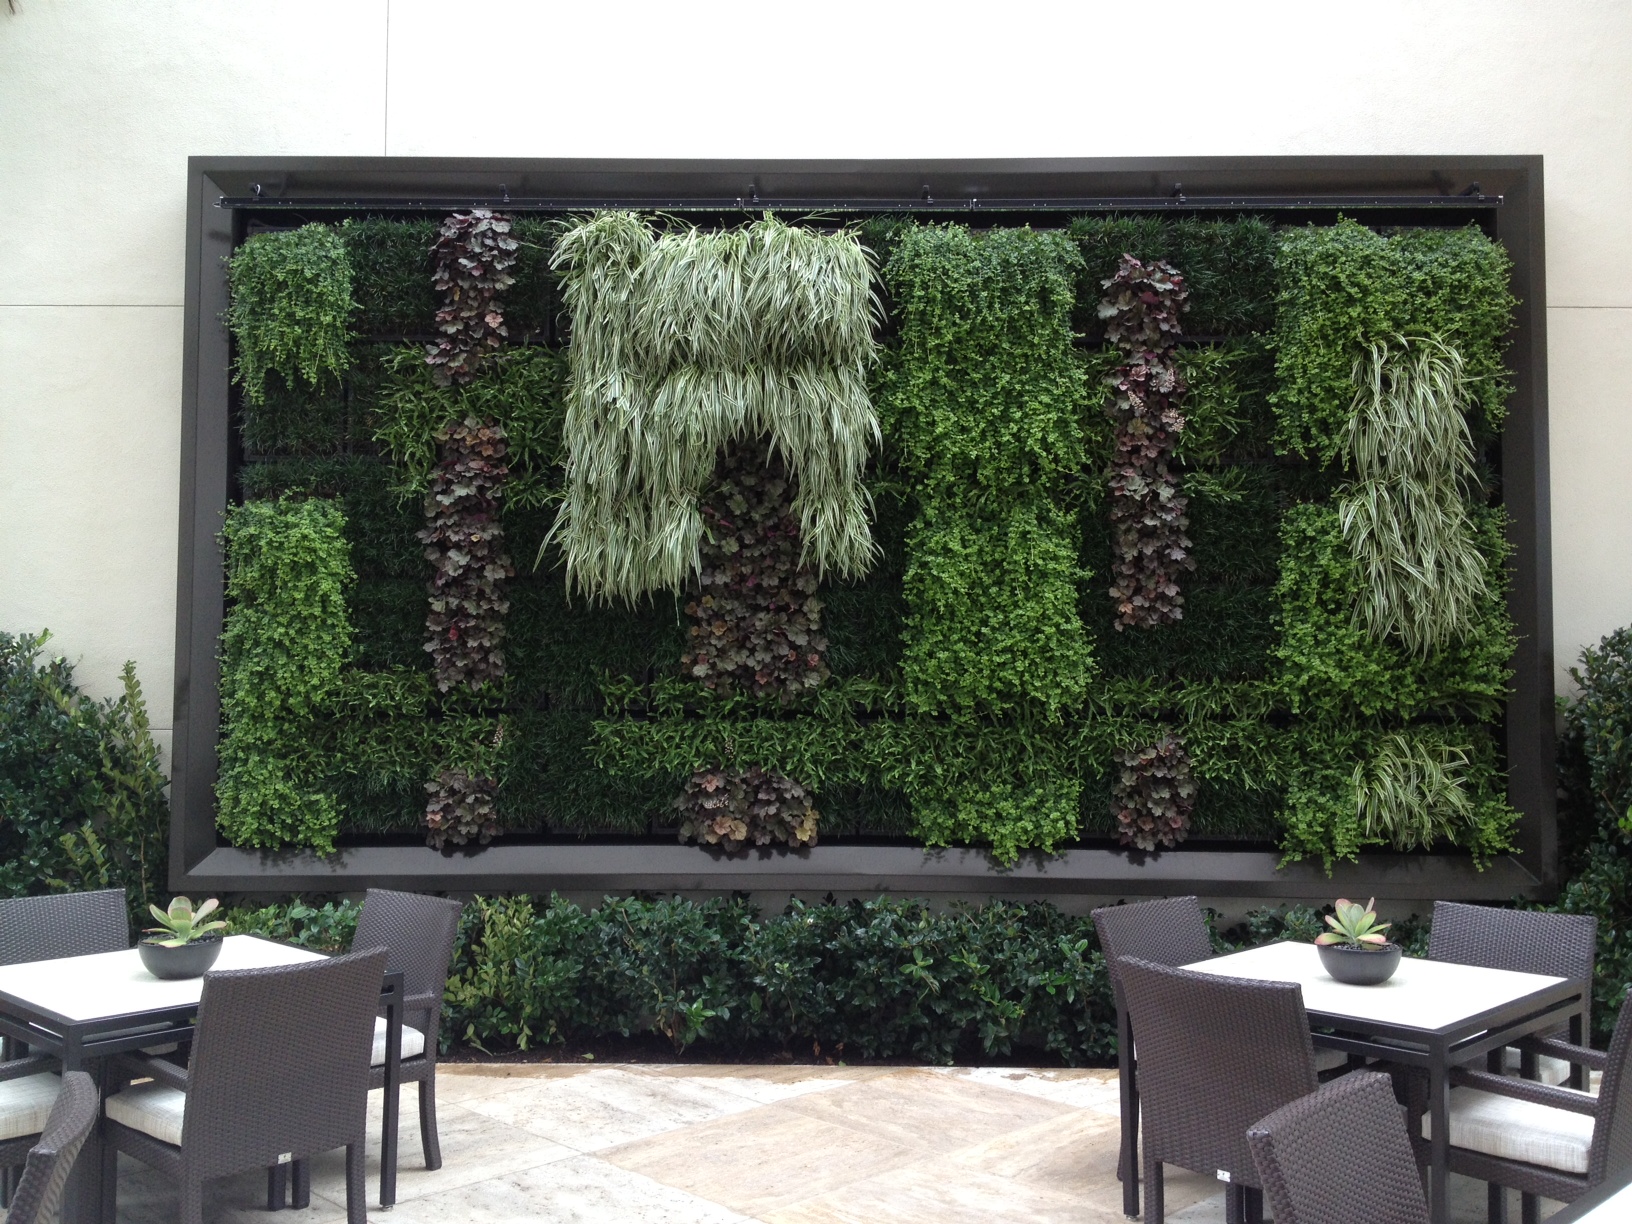 GreenScaped Buildings designed and installed this living wall for The Irvine Company, an excellent example of "Nature In The Space."